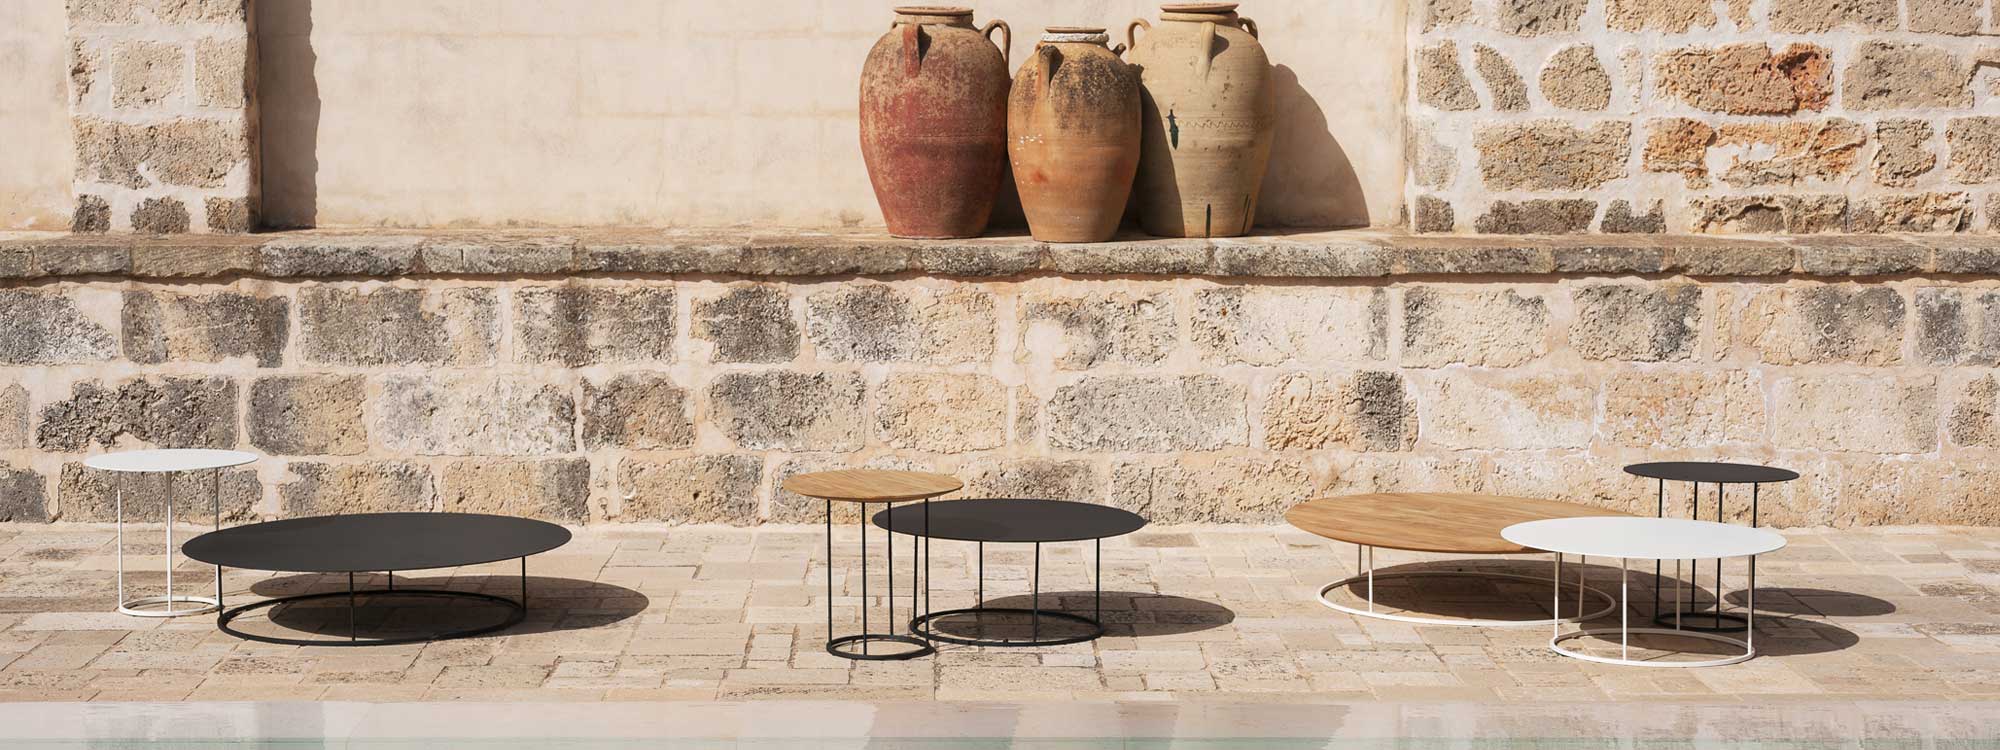 Image of different sizes and finishes of Zefiro circular low tables, in full sunshine on rustic terrace